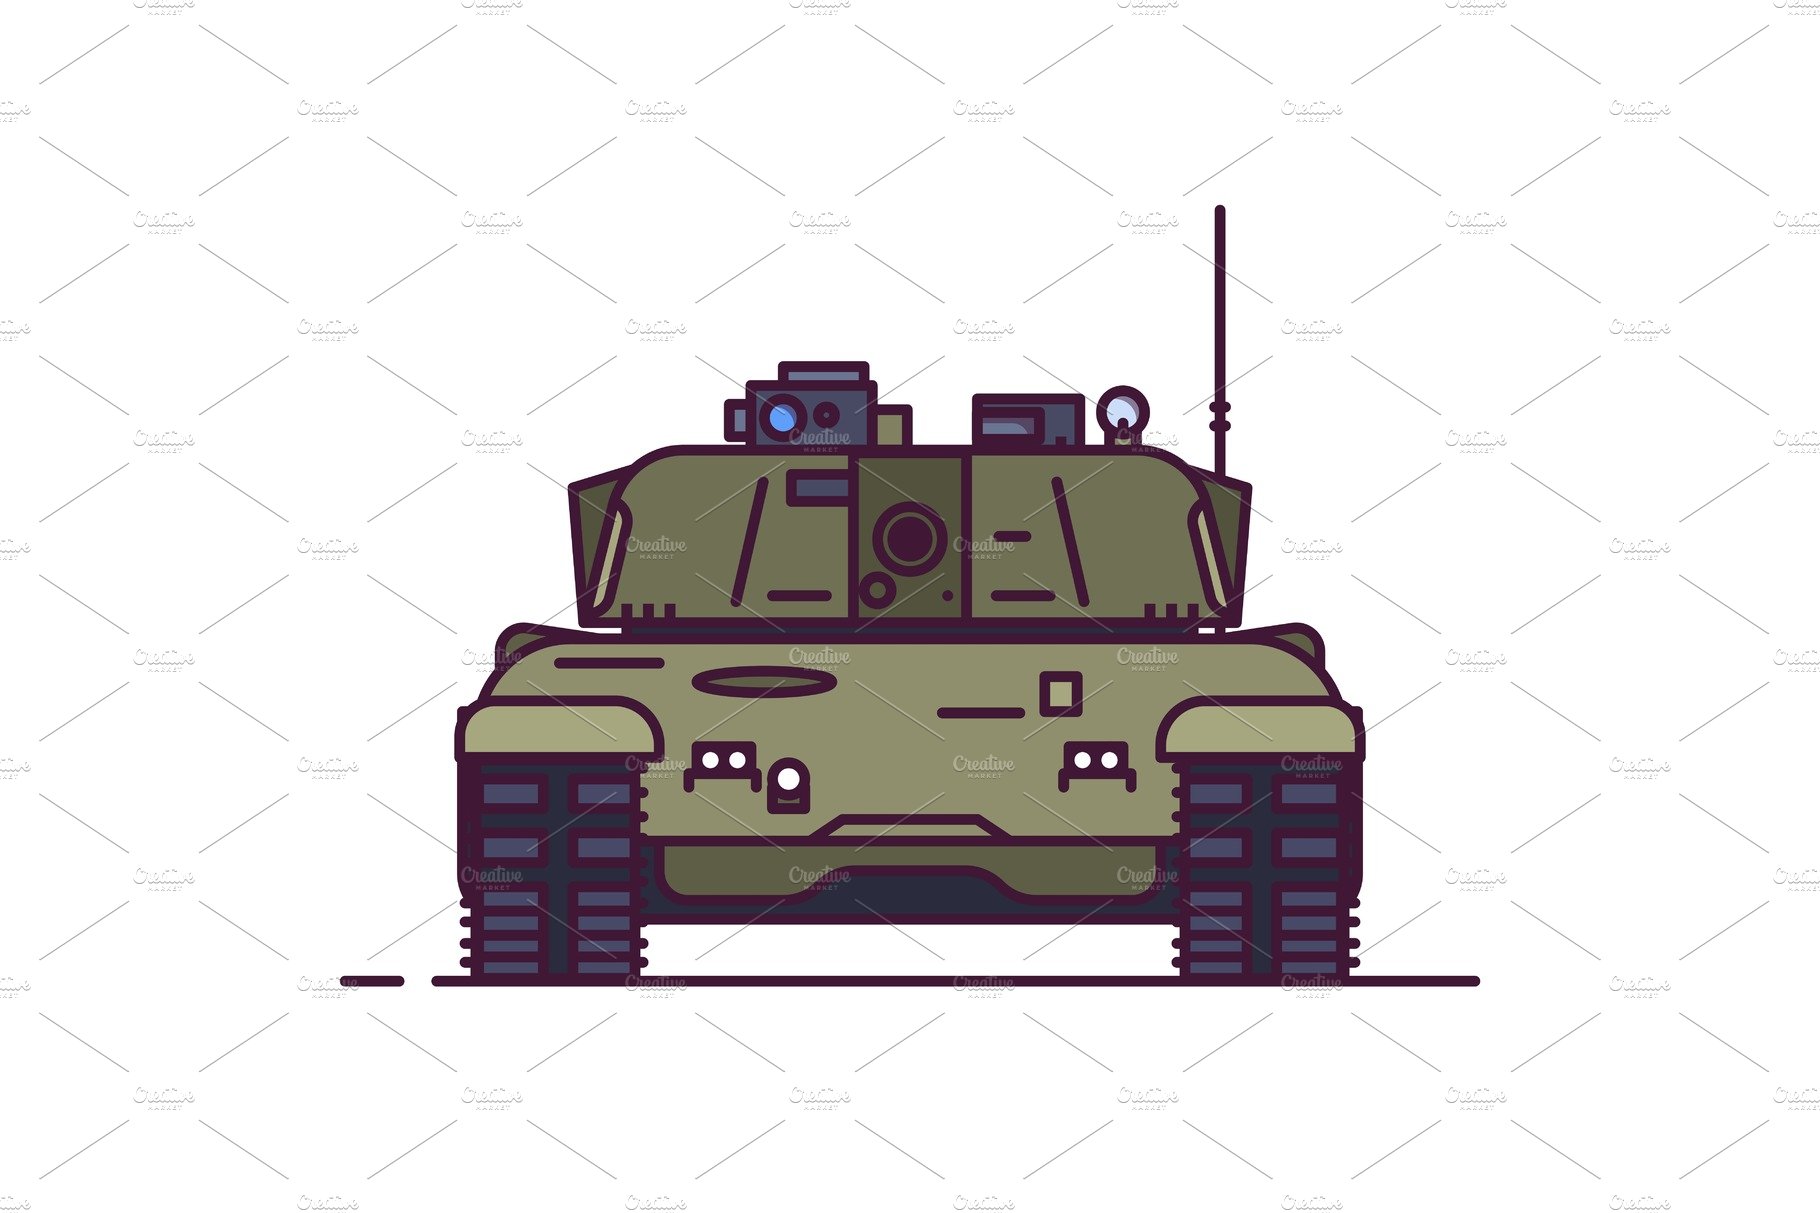 Front view of main battle tank cover image.